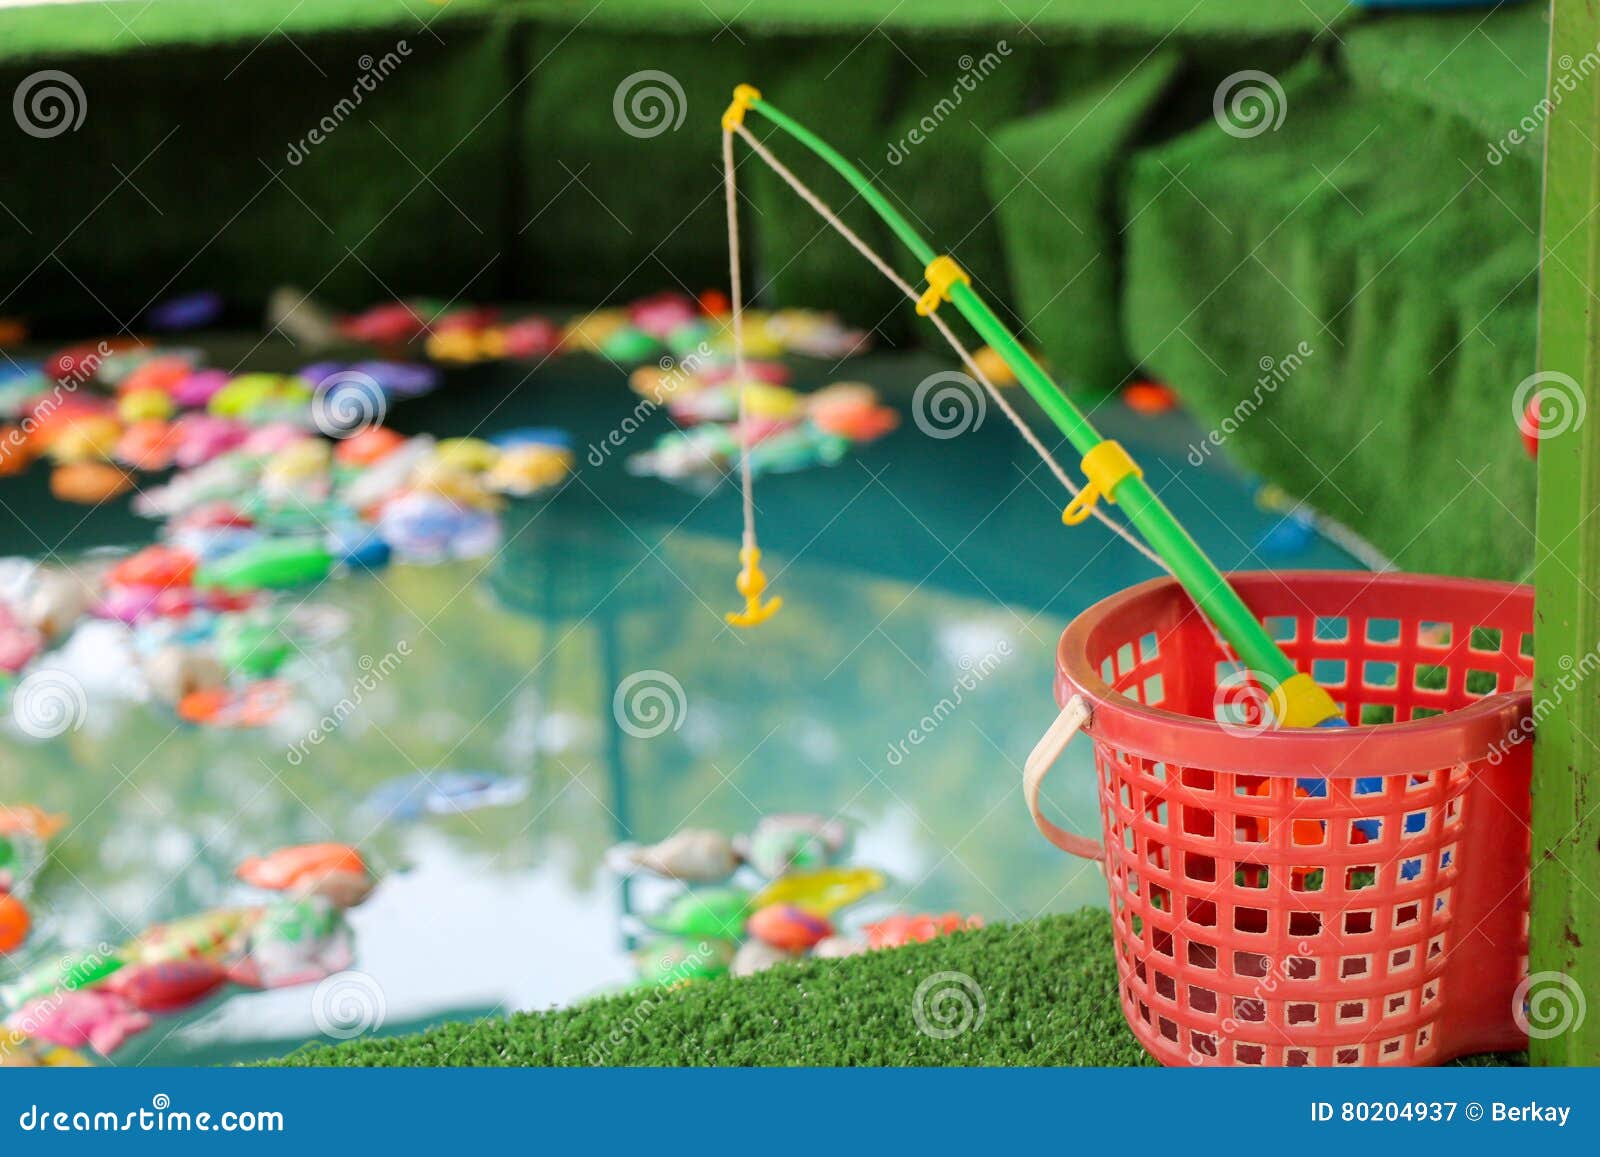 Toy Fishing Rod and Fake Fish in the Pond Stock Image - Image of